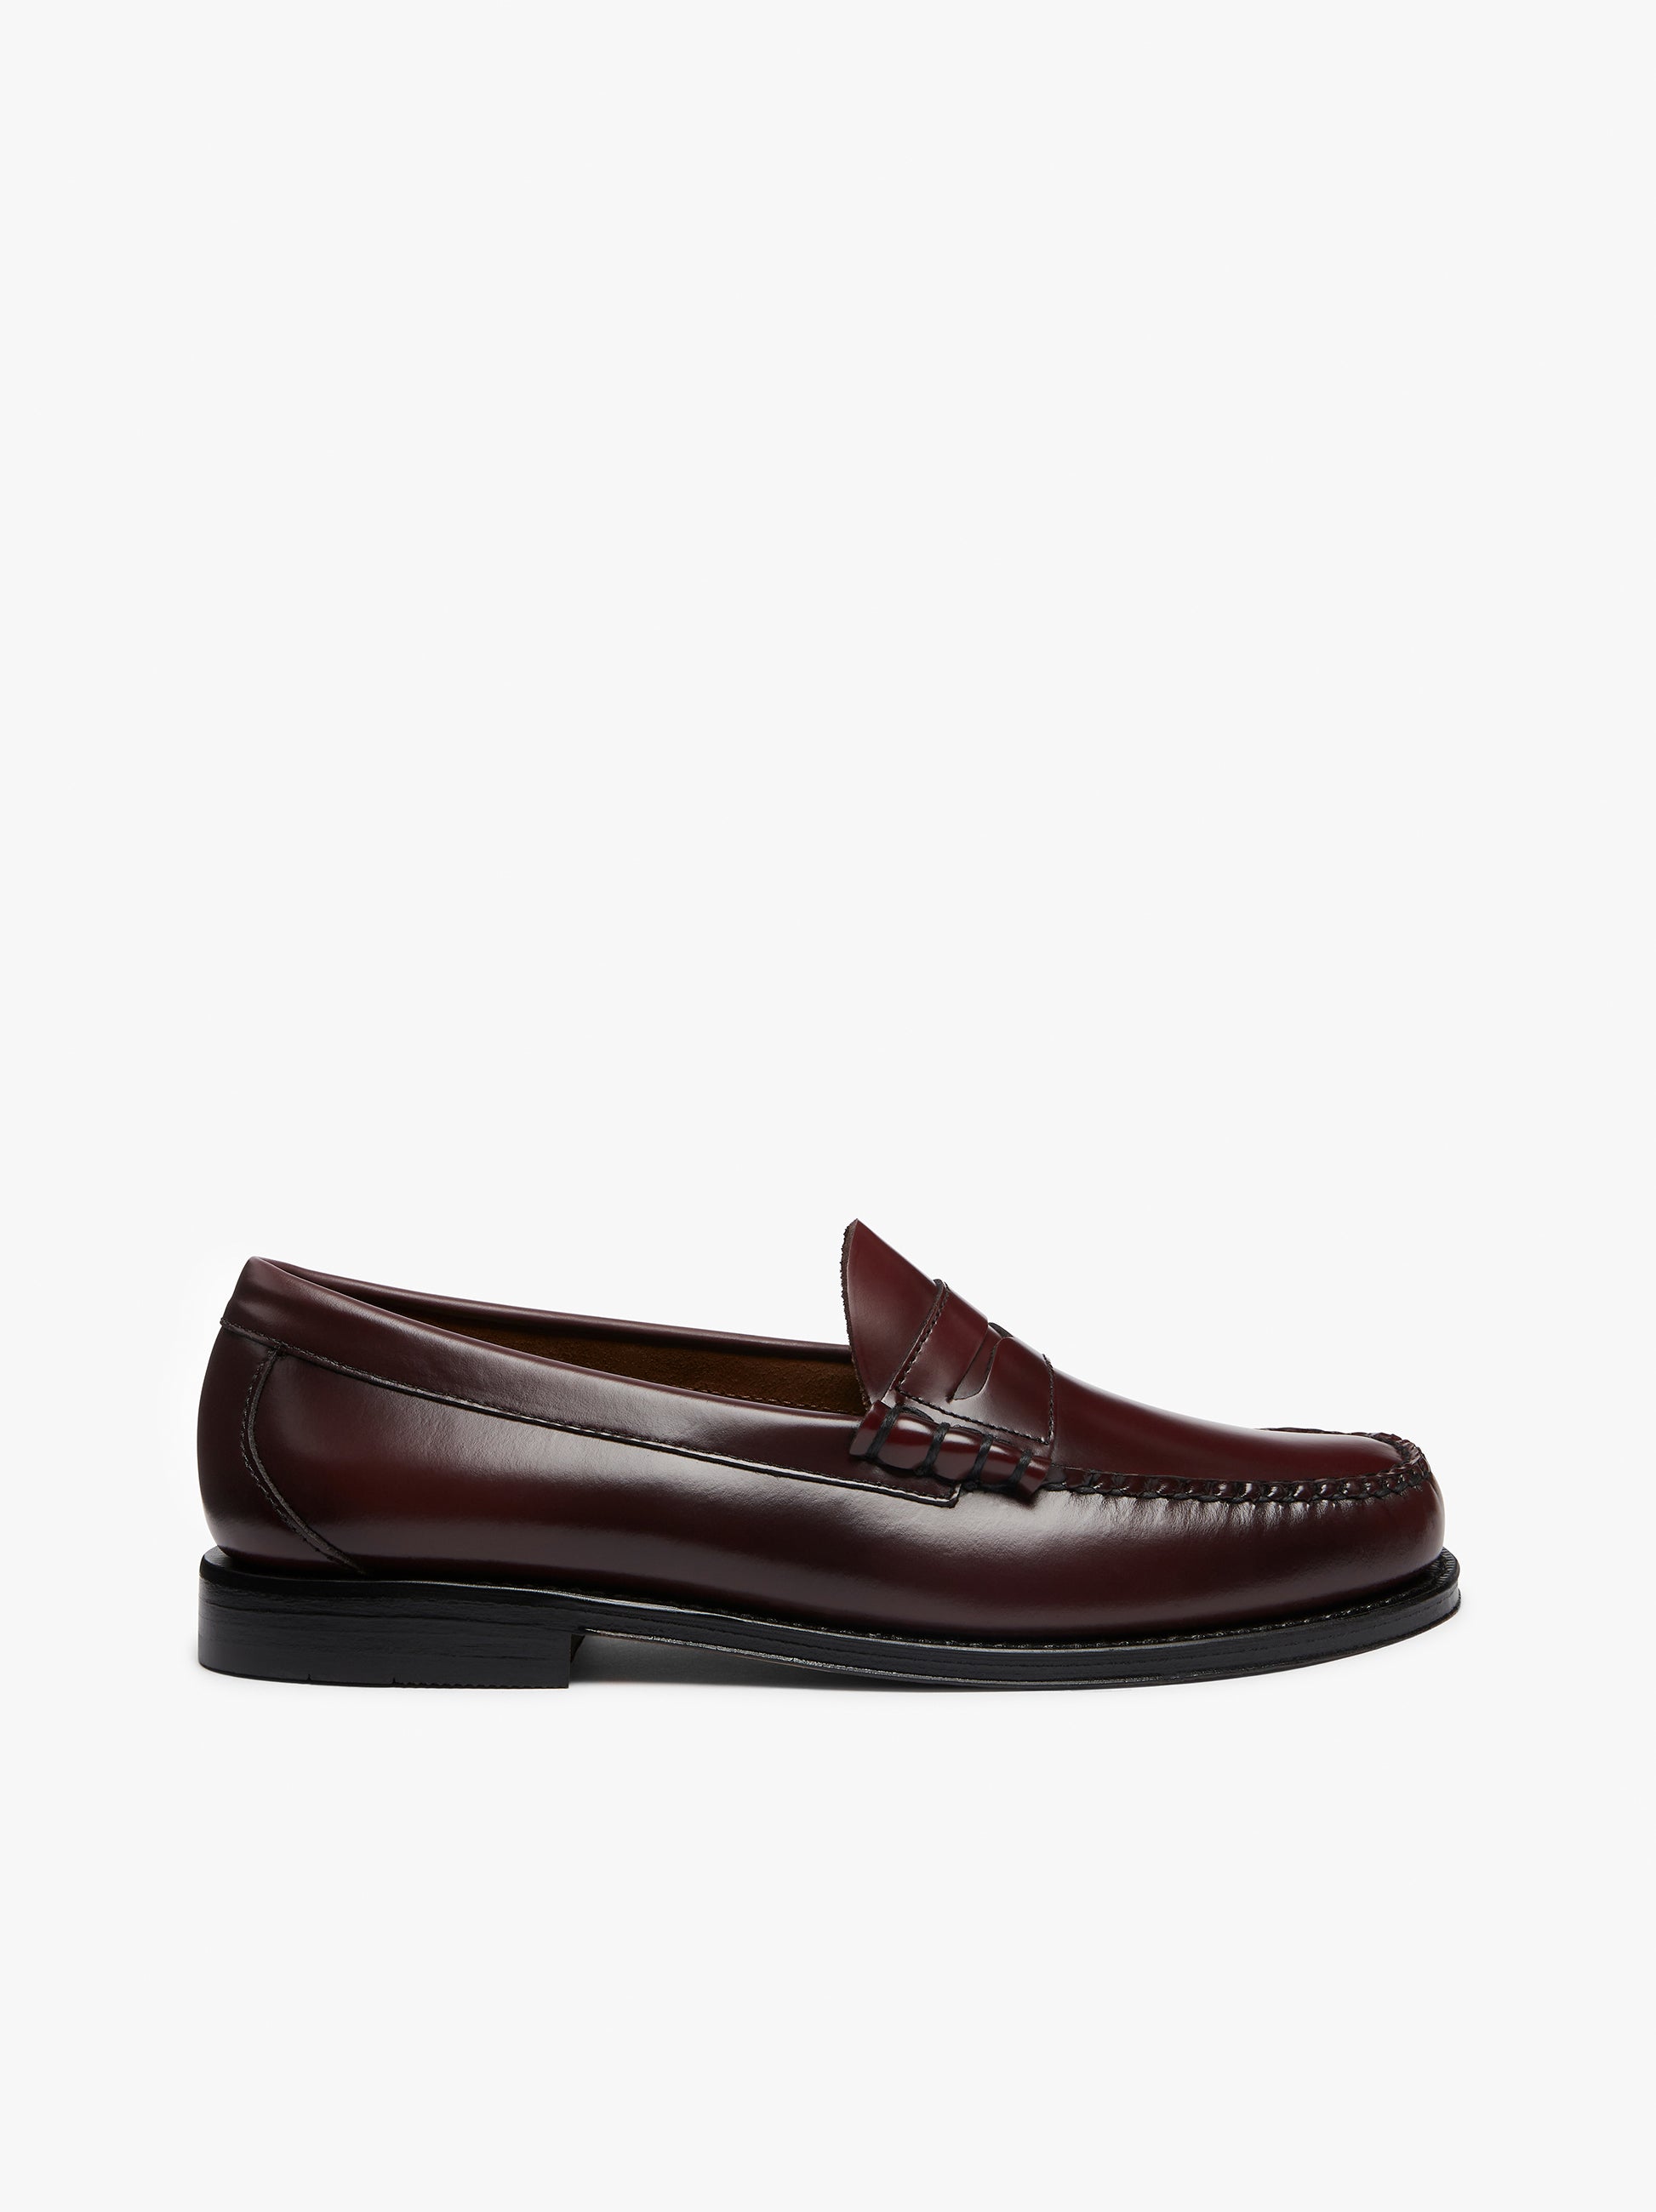 Larson Penny Loafer | Leather Penny Loafers – G.H.BASS – G.H.BASS 1876